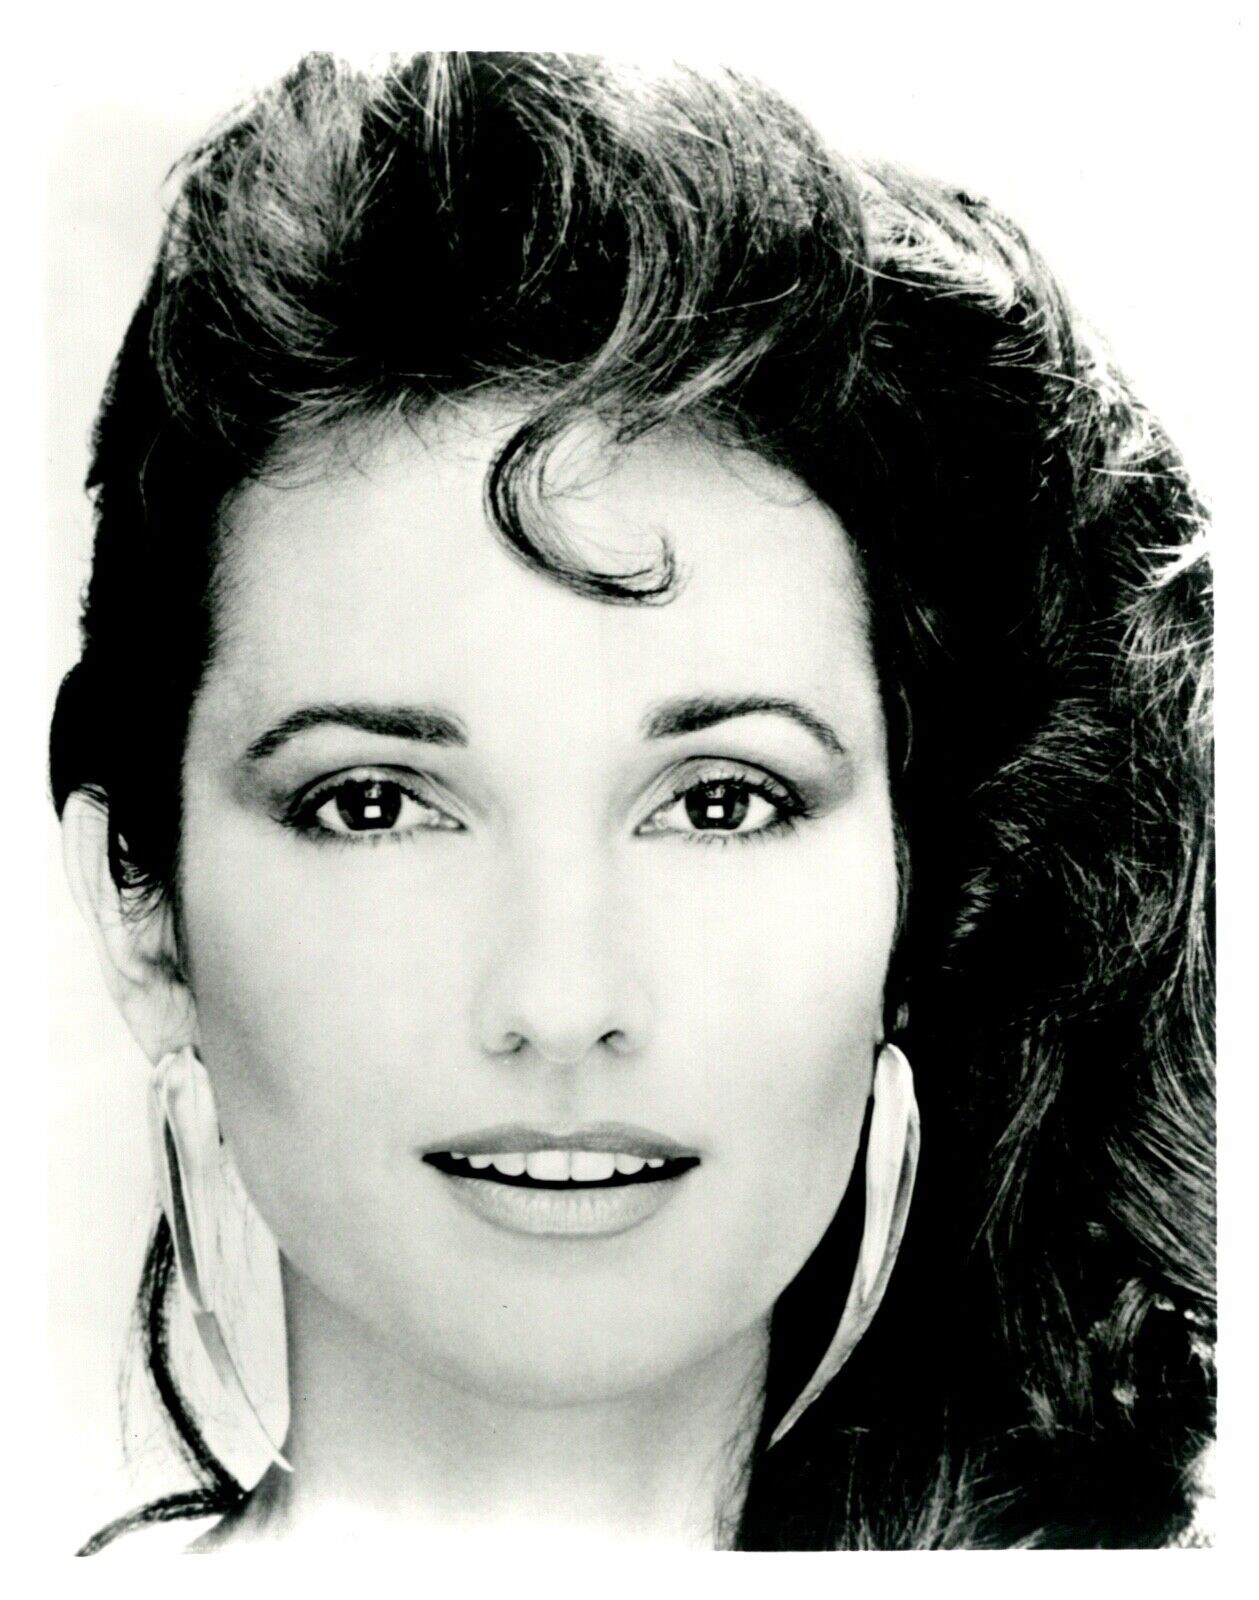 Susan Lucci American Actress Unsigned Vintage Celebrity 8x10 B&W Photo